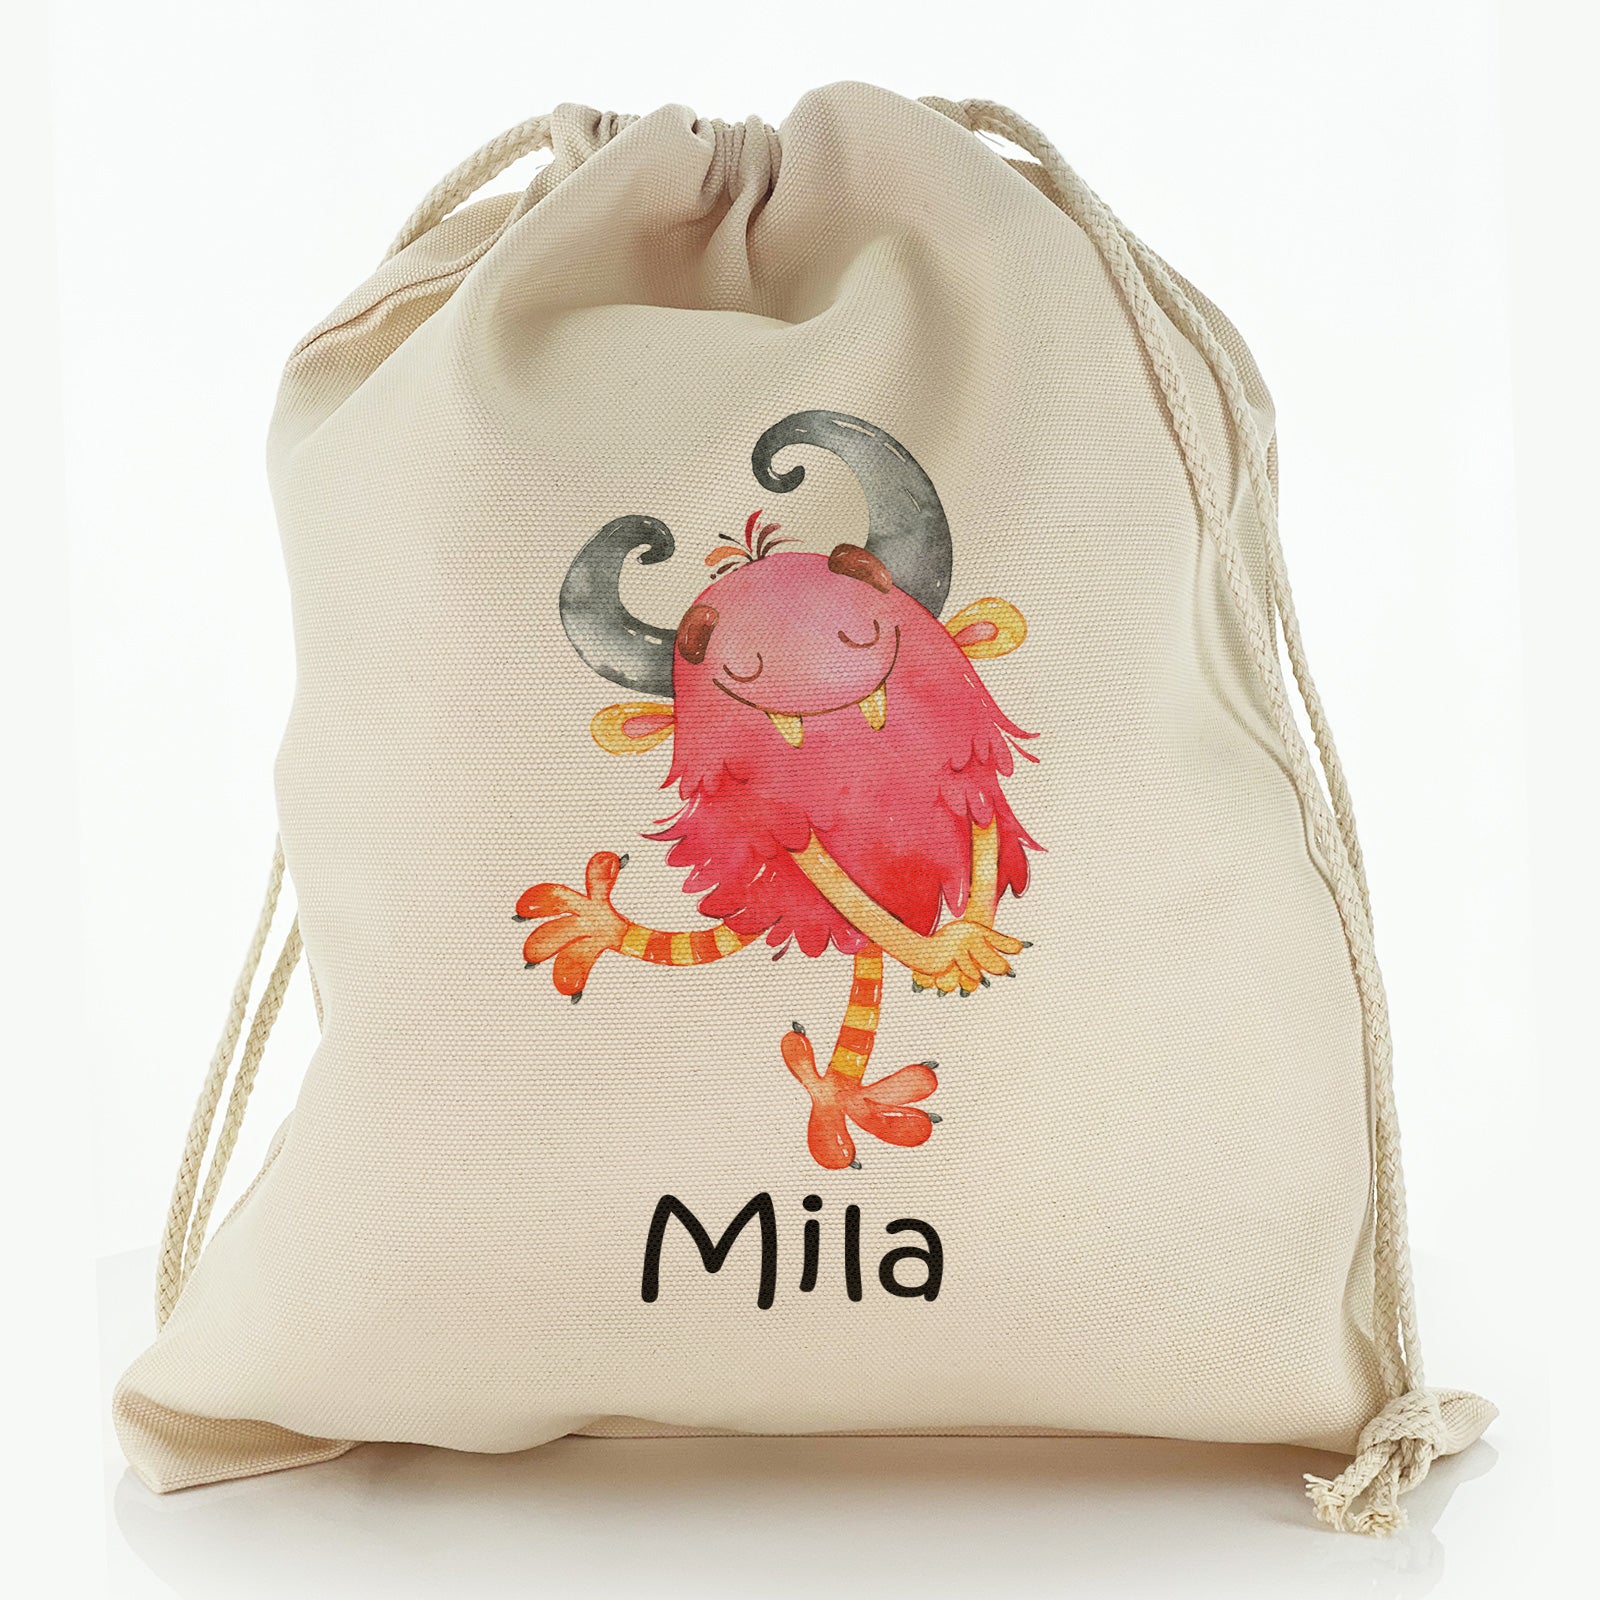 Personalised Canvas Sack with Childish Text and Horned Hairy Red Monster